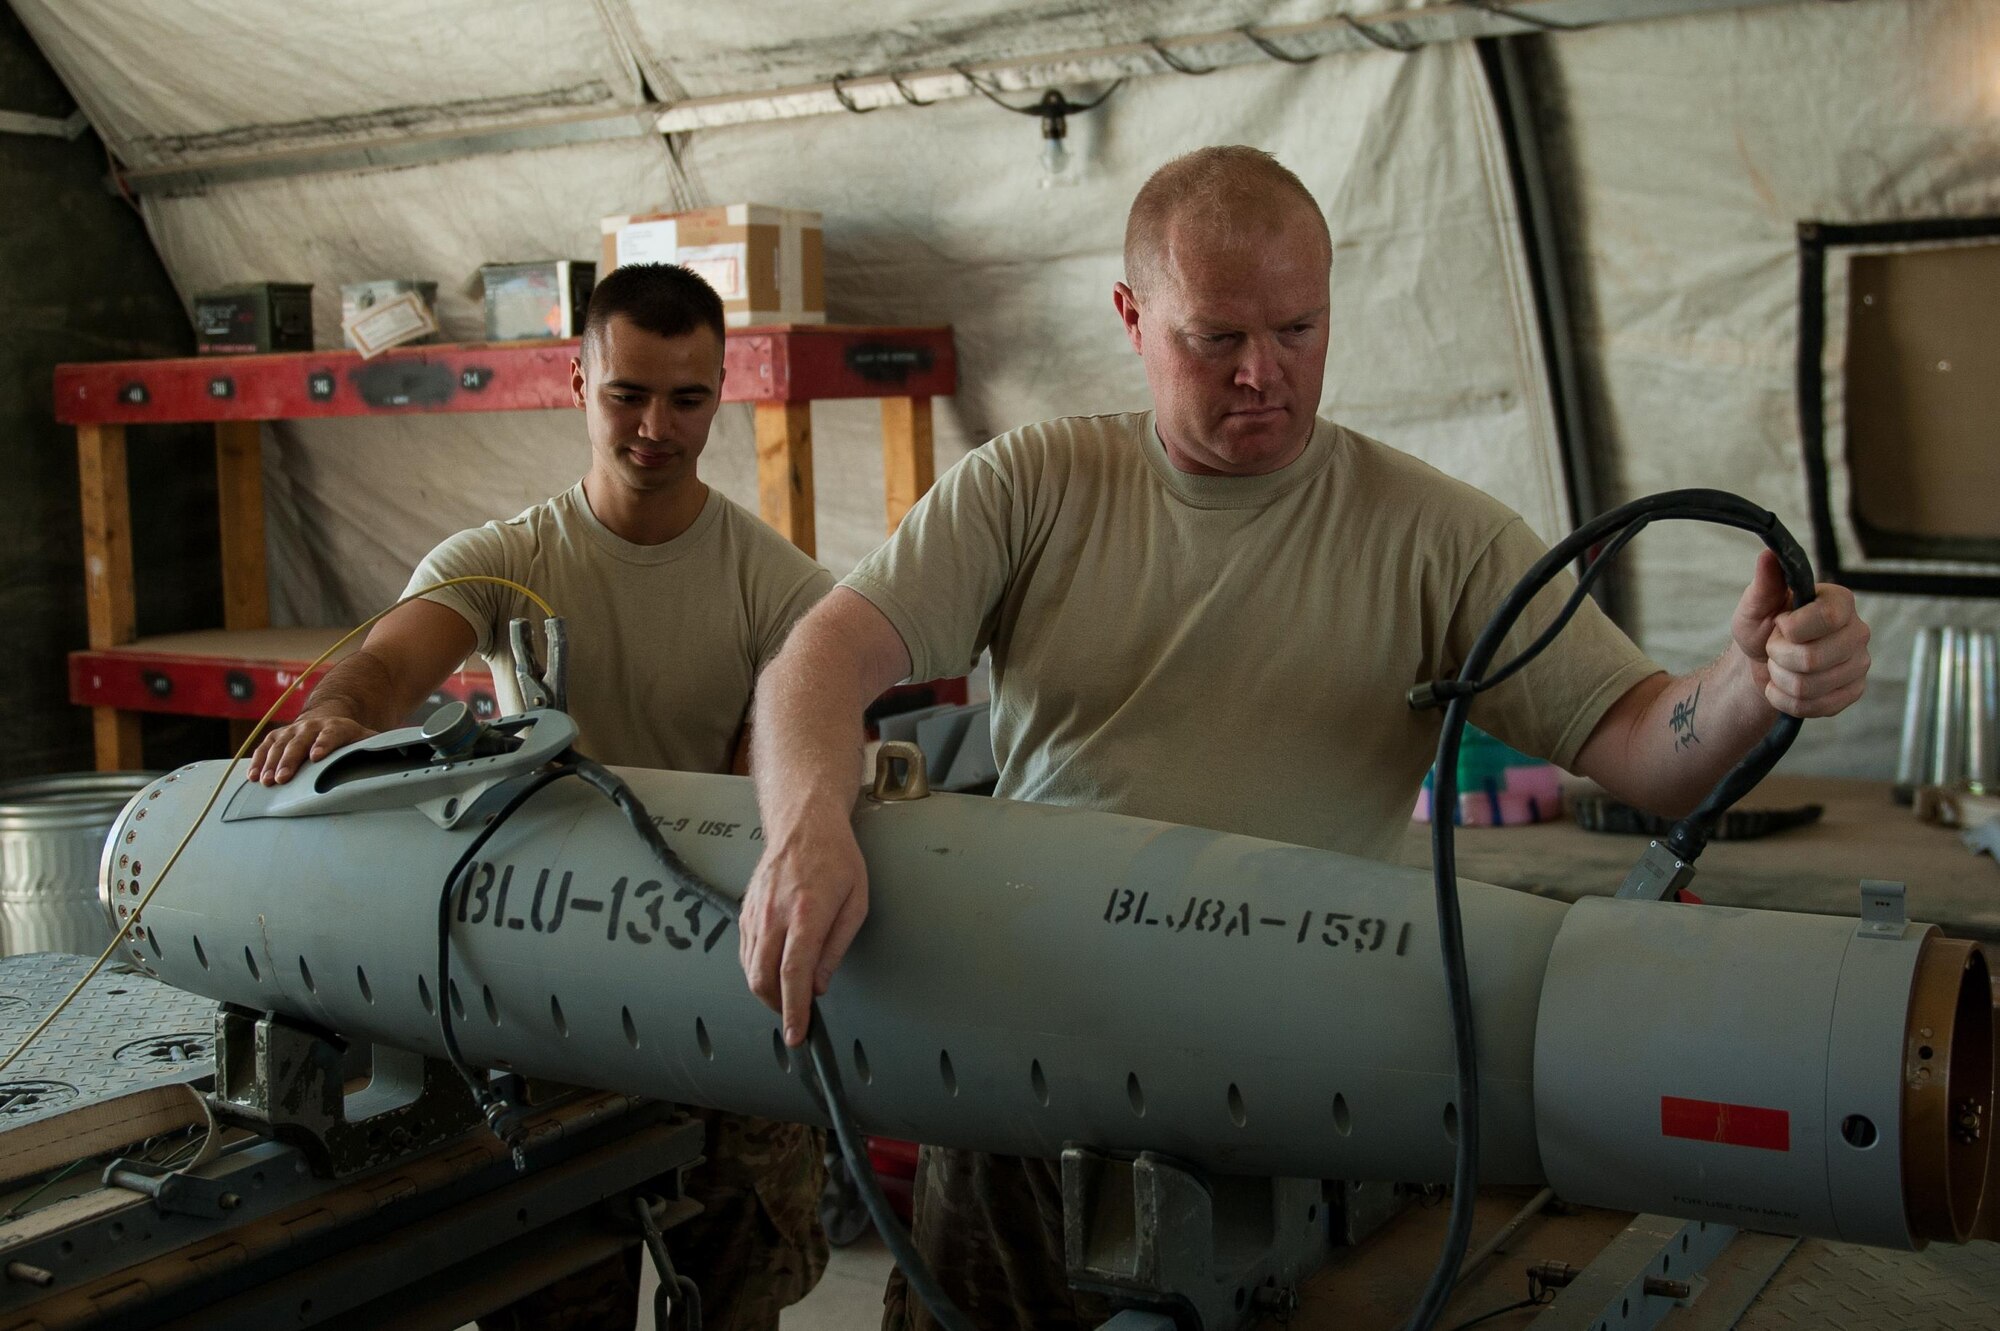 U.S. Air Force Airman 1st Class Matthew Lopez, left, 62nd Expeditionary Reconnaissance Squadron munitions systems technician, helps build a GPS-guided GBU-49 weapon at Kandahar Airfield, Afghanistan, Aug. 15, 2015.  The 62nd ERS Munitions Flight ensures that every munition loaded onto an MQ-1 Predator and MQ-9 Reaper will perform as expected when used. (U.S. Air Force photo by Tech. Sgt. Joseph Swafford/Released)